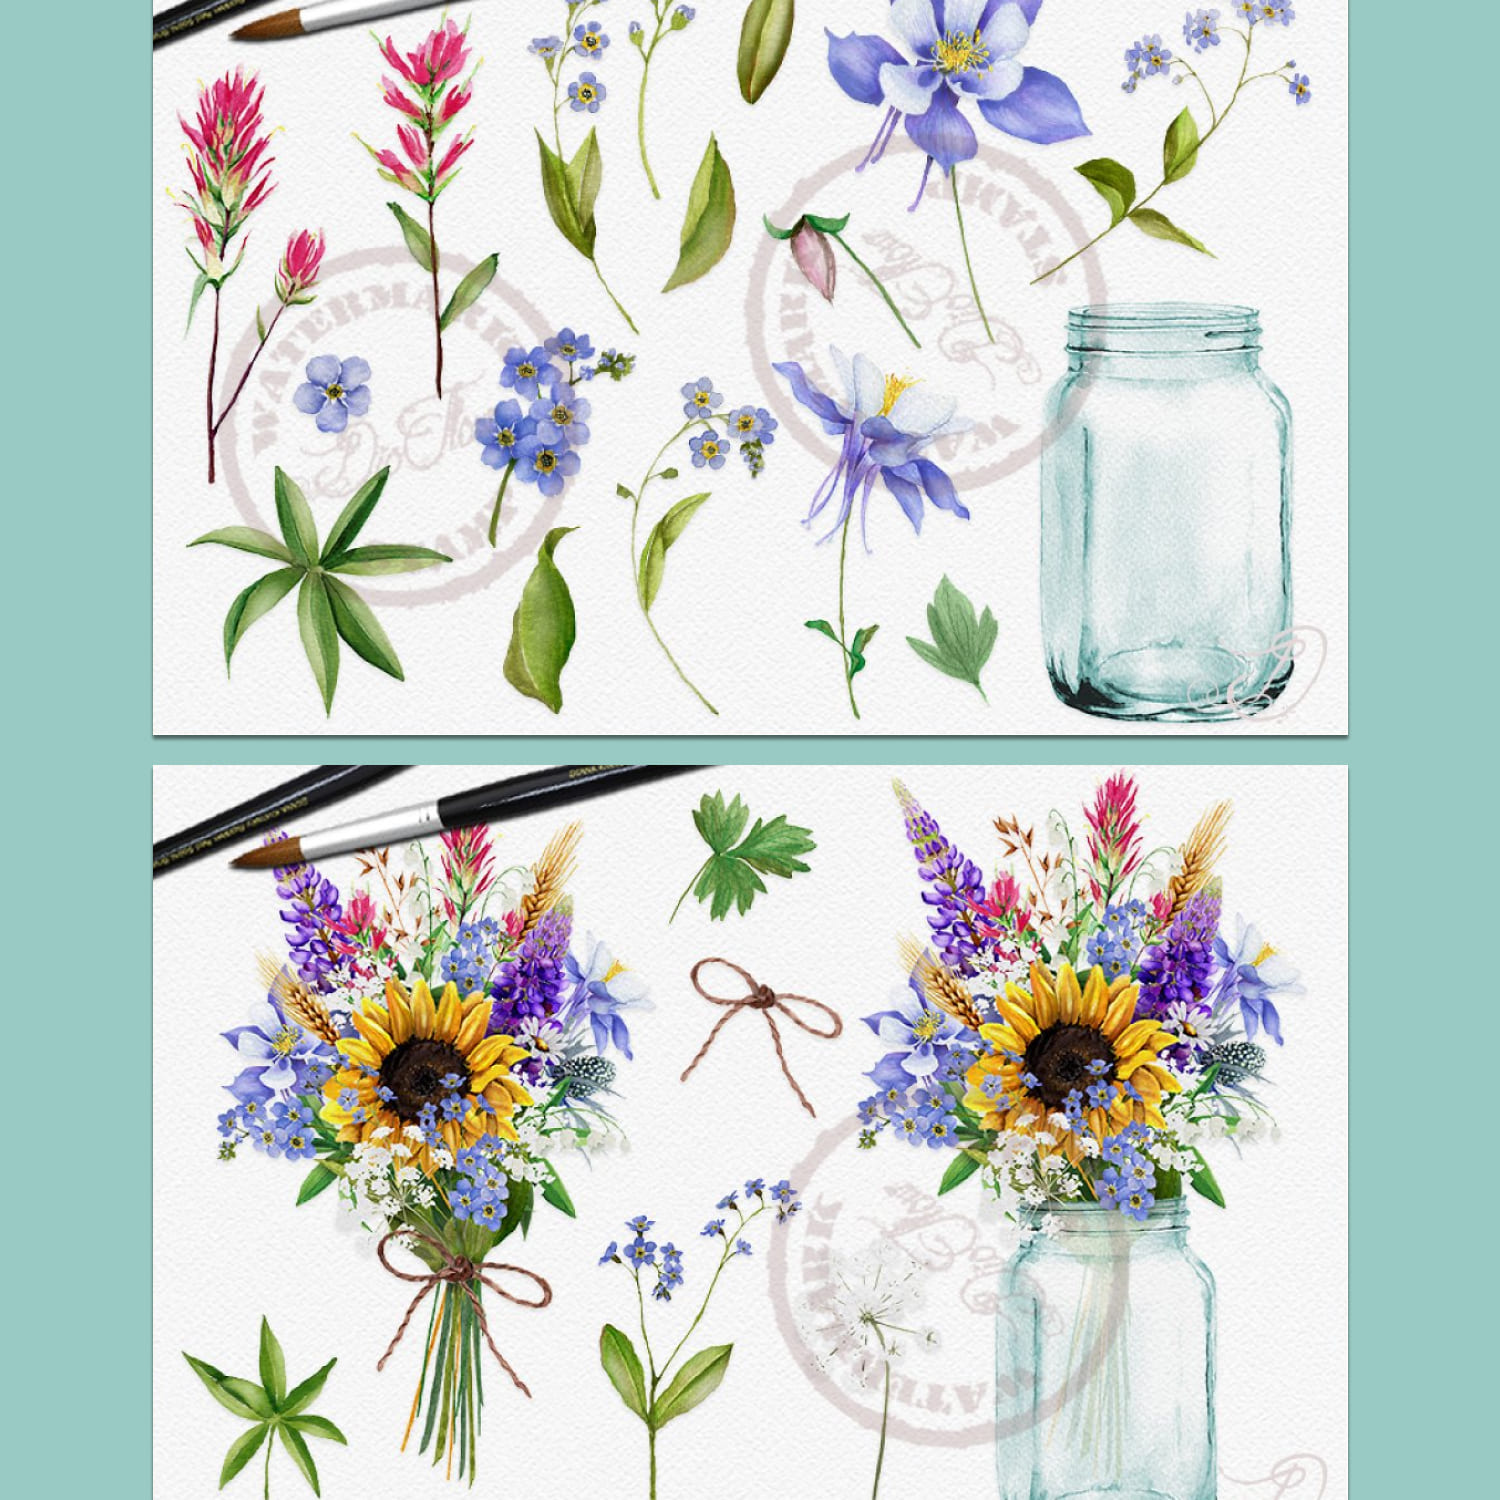 Wild Flowers Watercolor Clip Art cover.